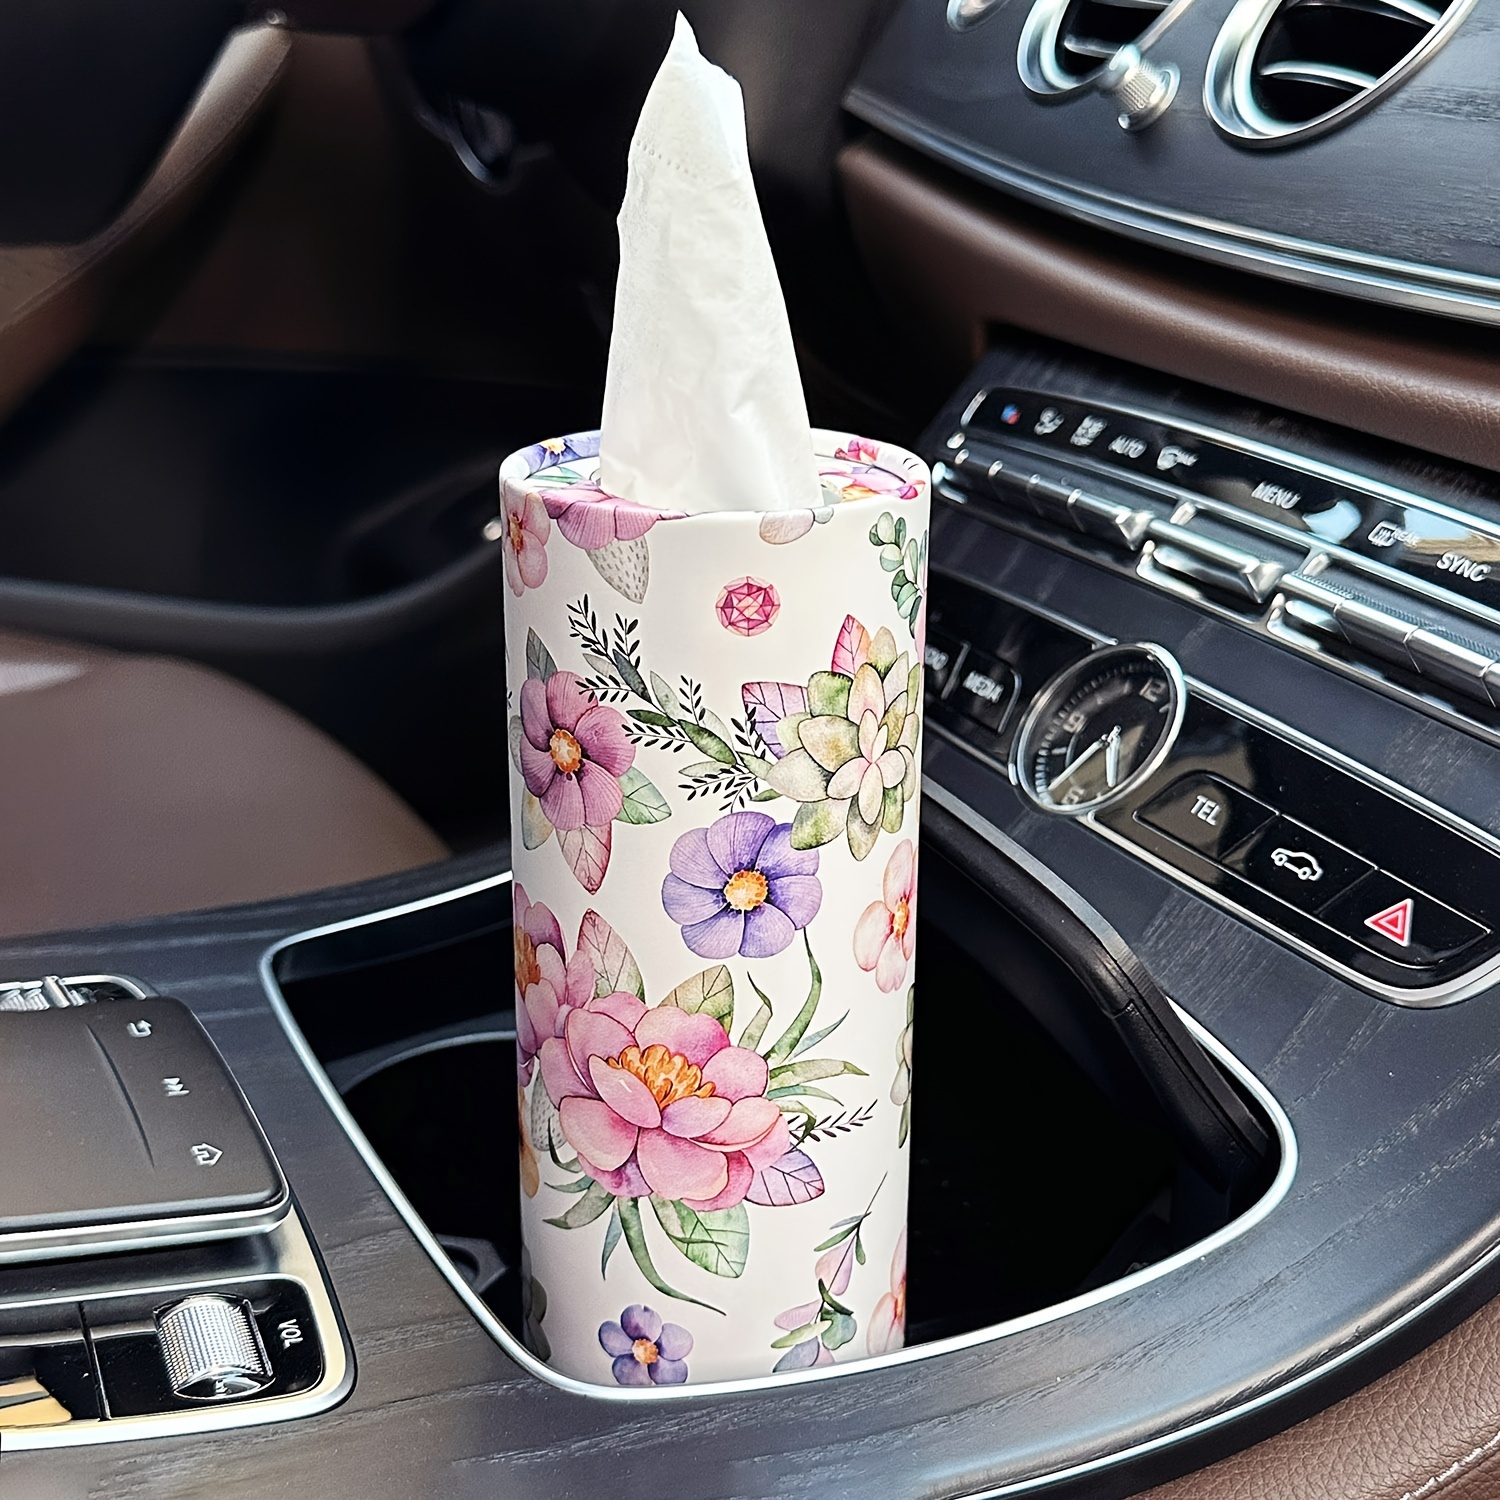  MiOYOOW Car Tissue Holders, Car Cup Holder Tissues Tube  Diameter 2.75'' PU Leather Cylinder Tissue Box for Car Bathroom Office Use  : Home & Kitchen